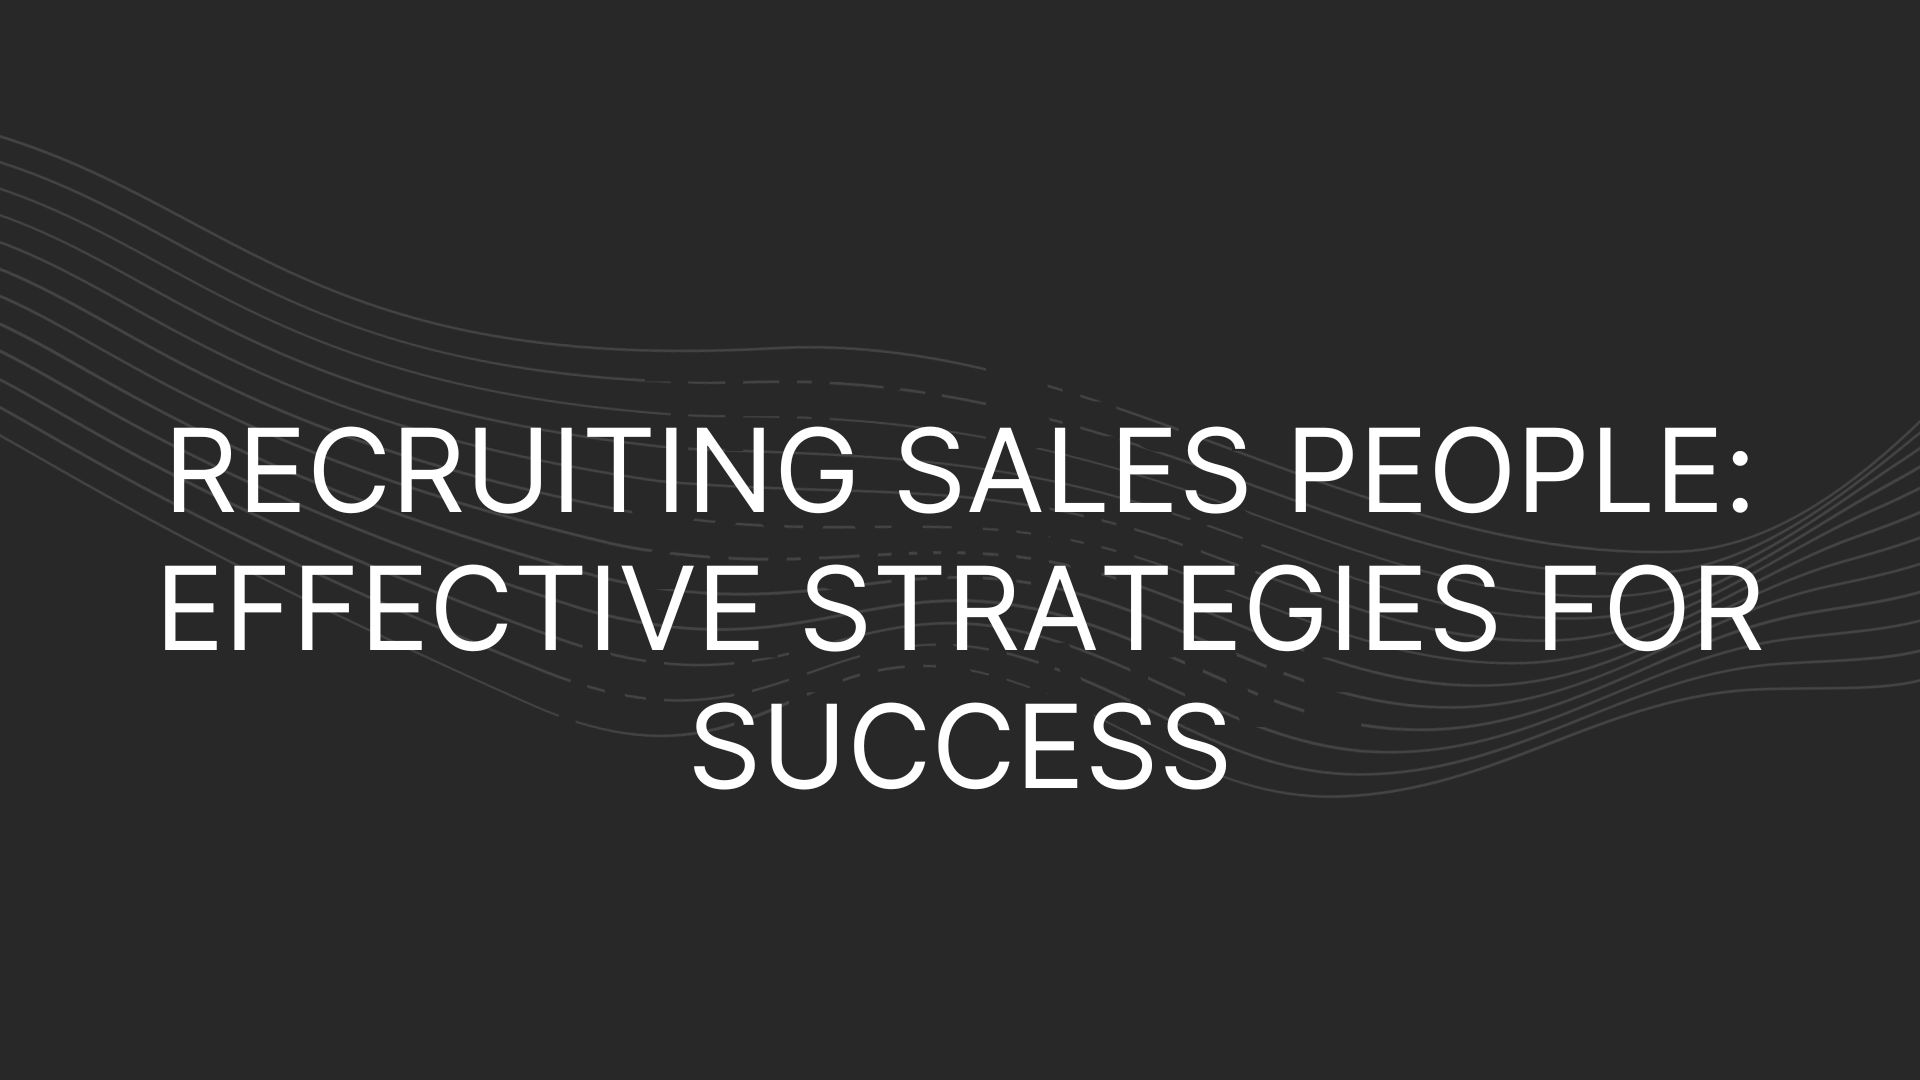 Recruiting Sales People